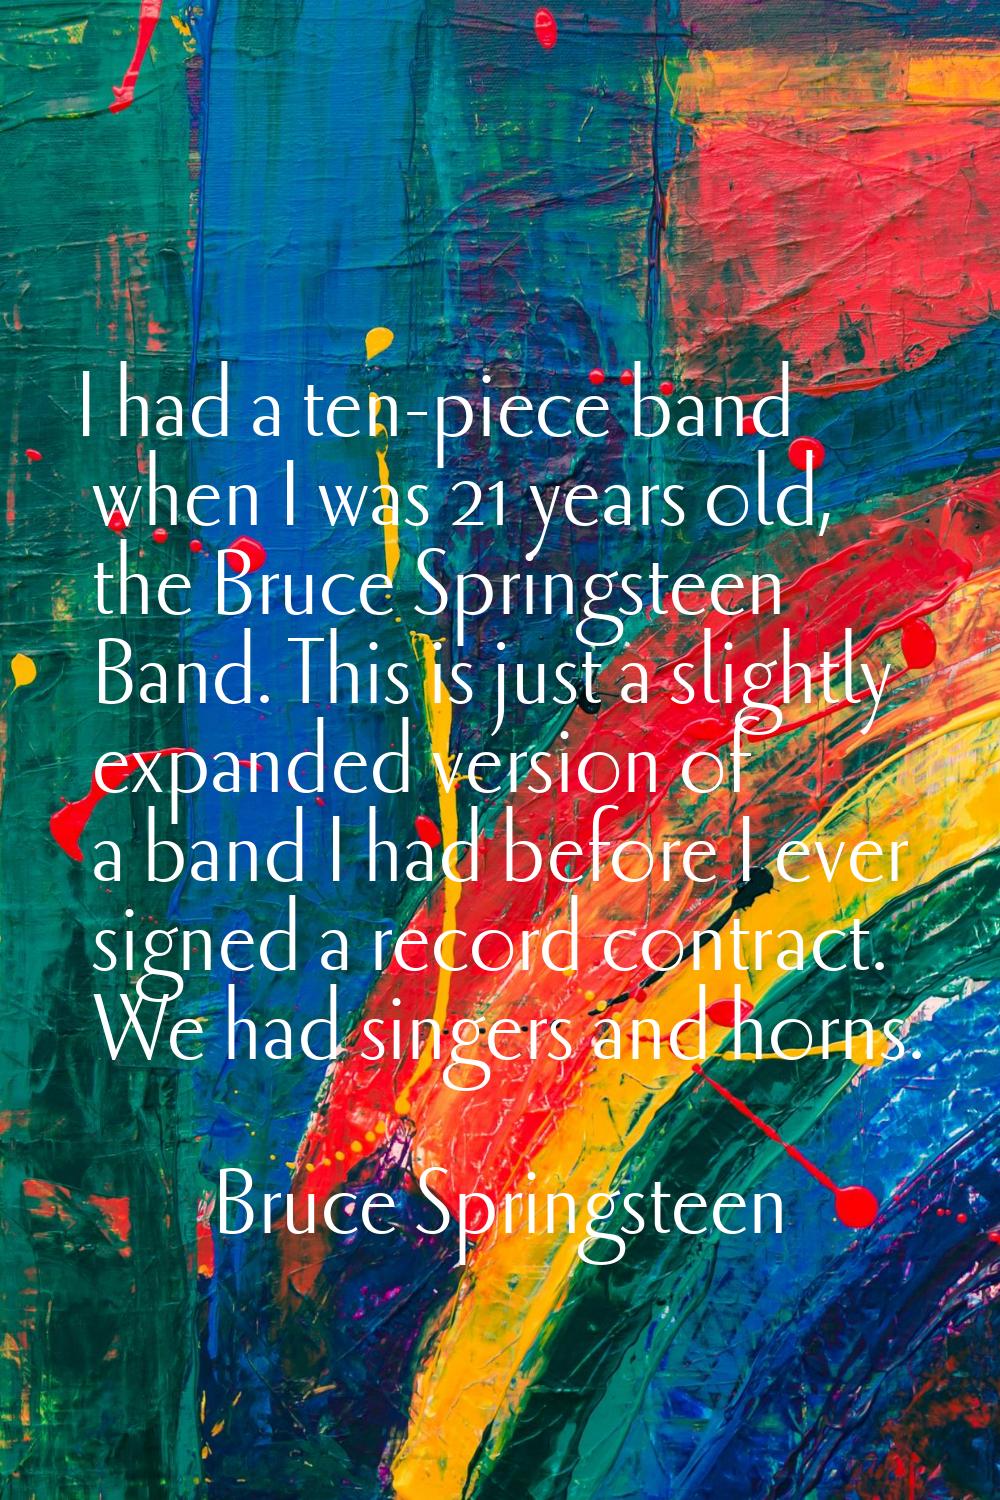 I had a ten-piece band when I was 21 years old, the Bruce Springsteen Band. This is just a slightly